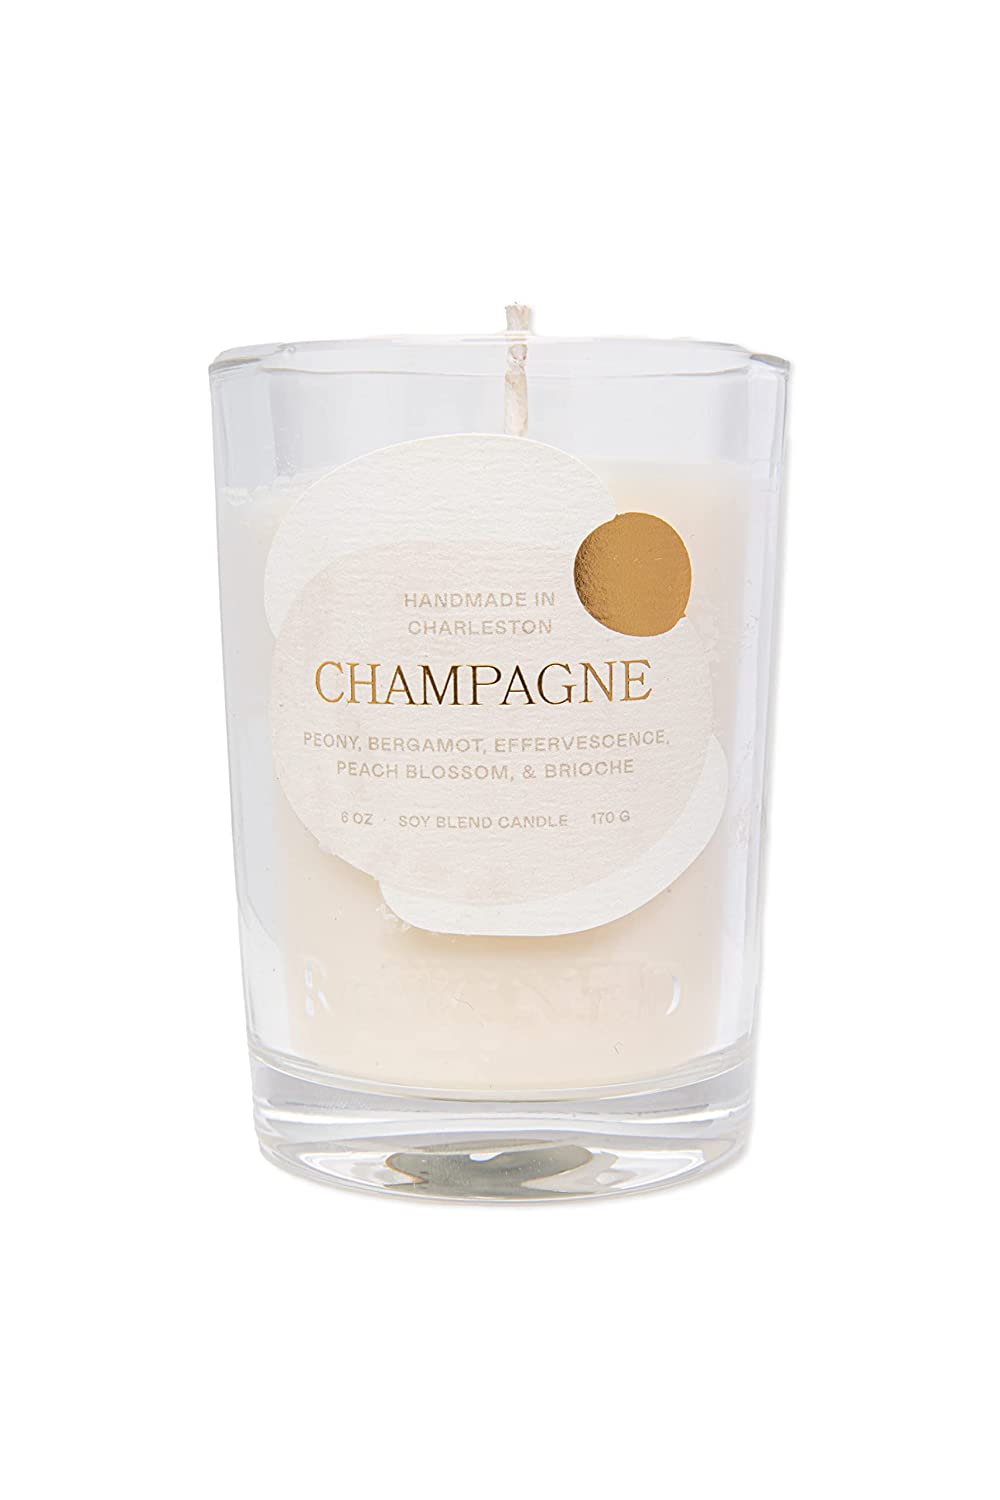 Rewined Champagne Candle 6 oz